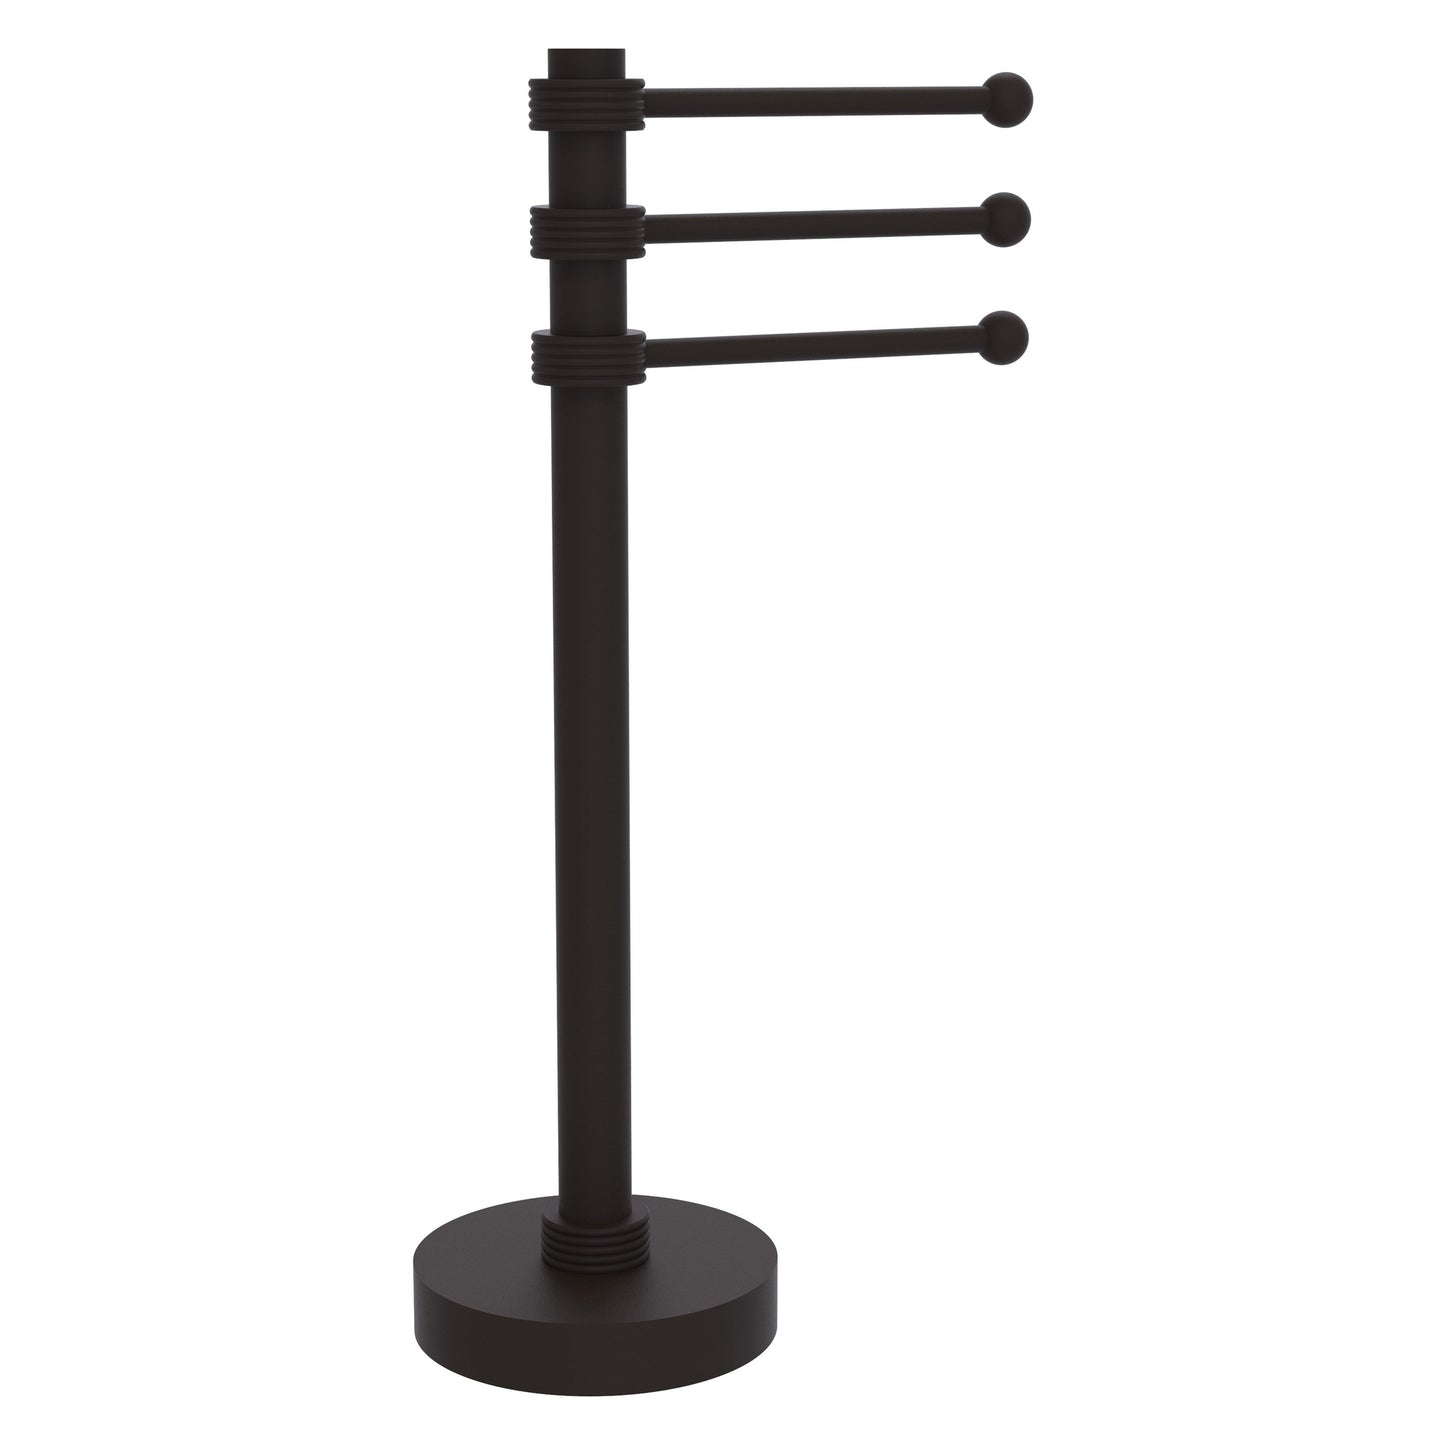 Allied Brass 973G 9" x 8" Oil Rubbed Bronze Solid Brass Vanity Top 3-Swing Arm Guest Towel Holder With Grooved Accents